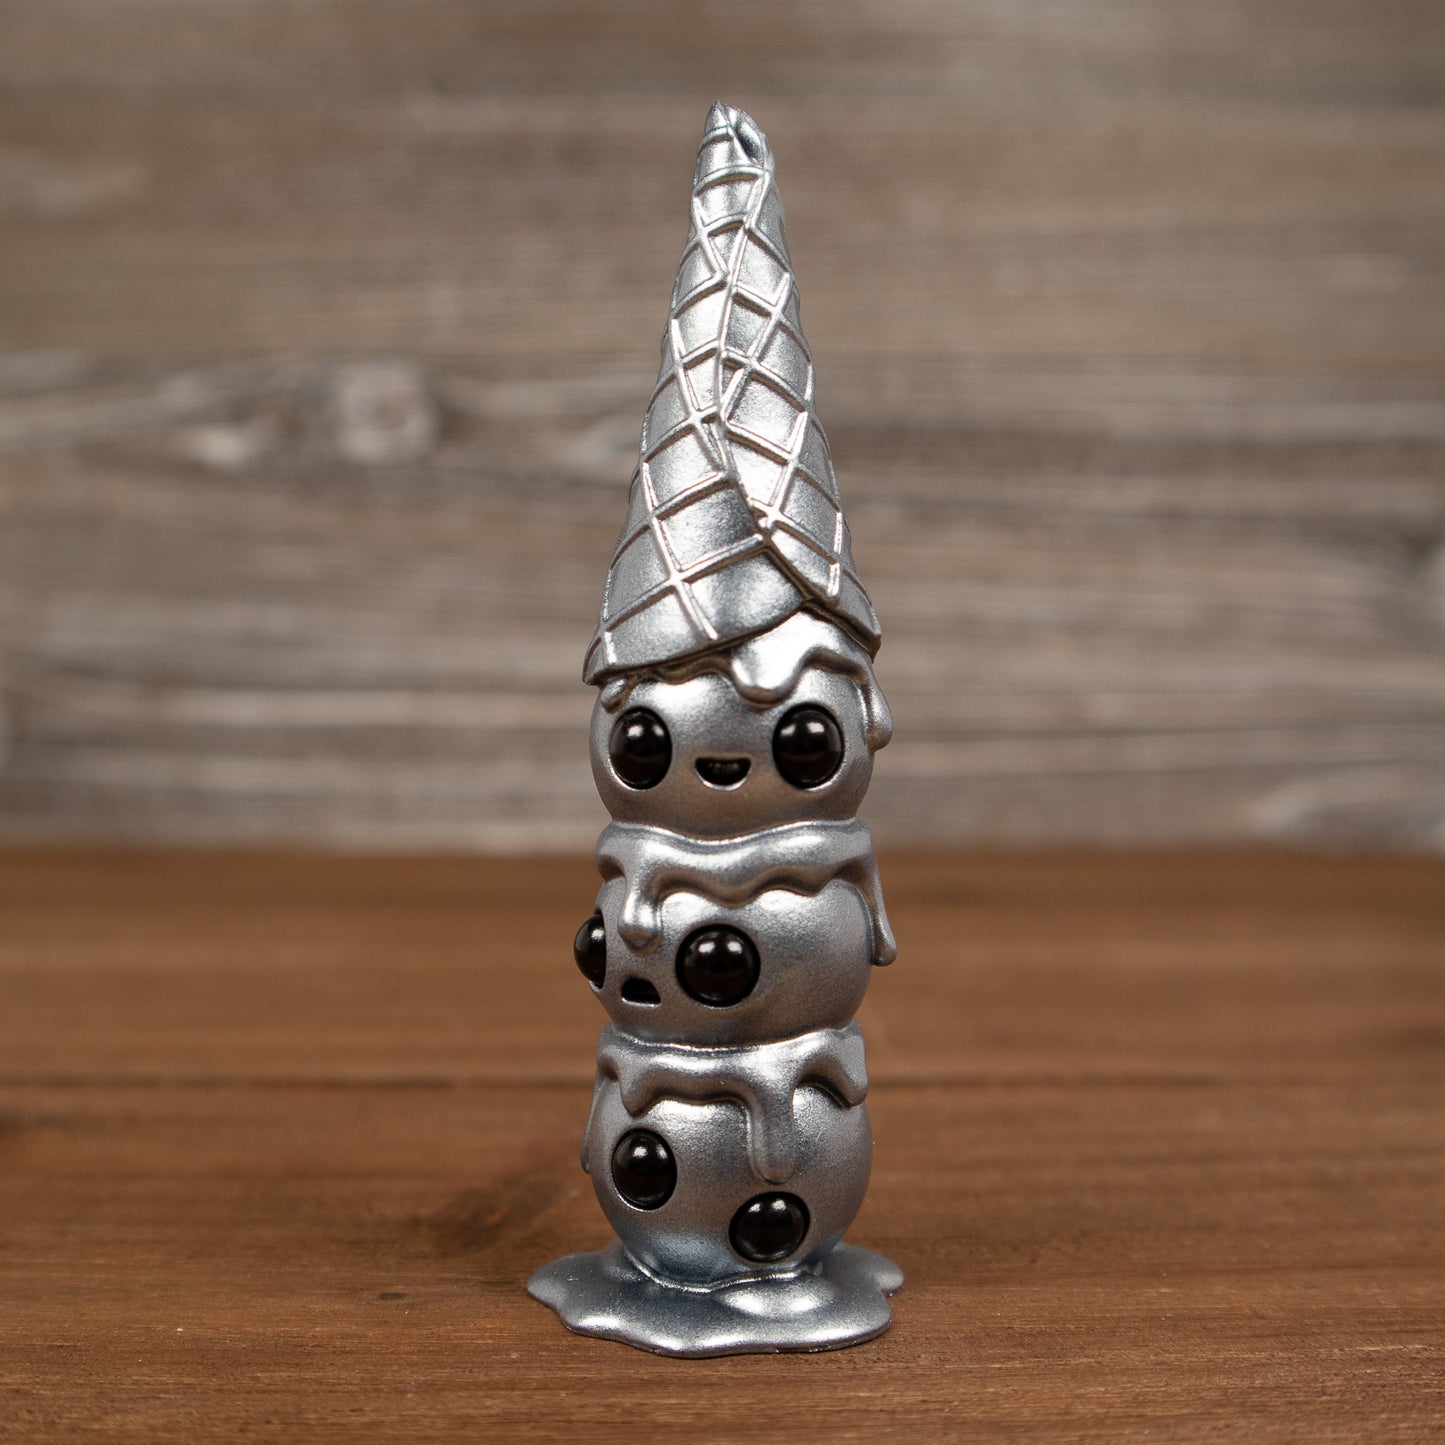 This is Wafull Liquid Silver 3.75" Hand-Painted Resin Figure